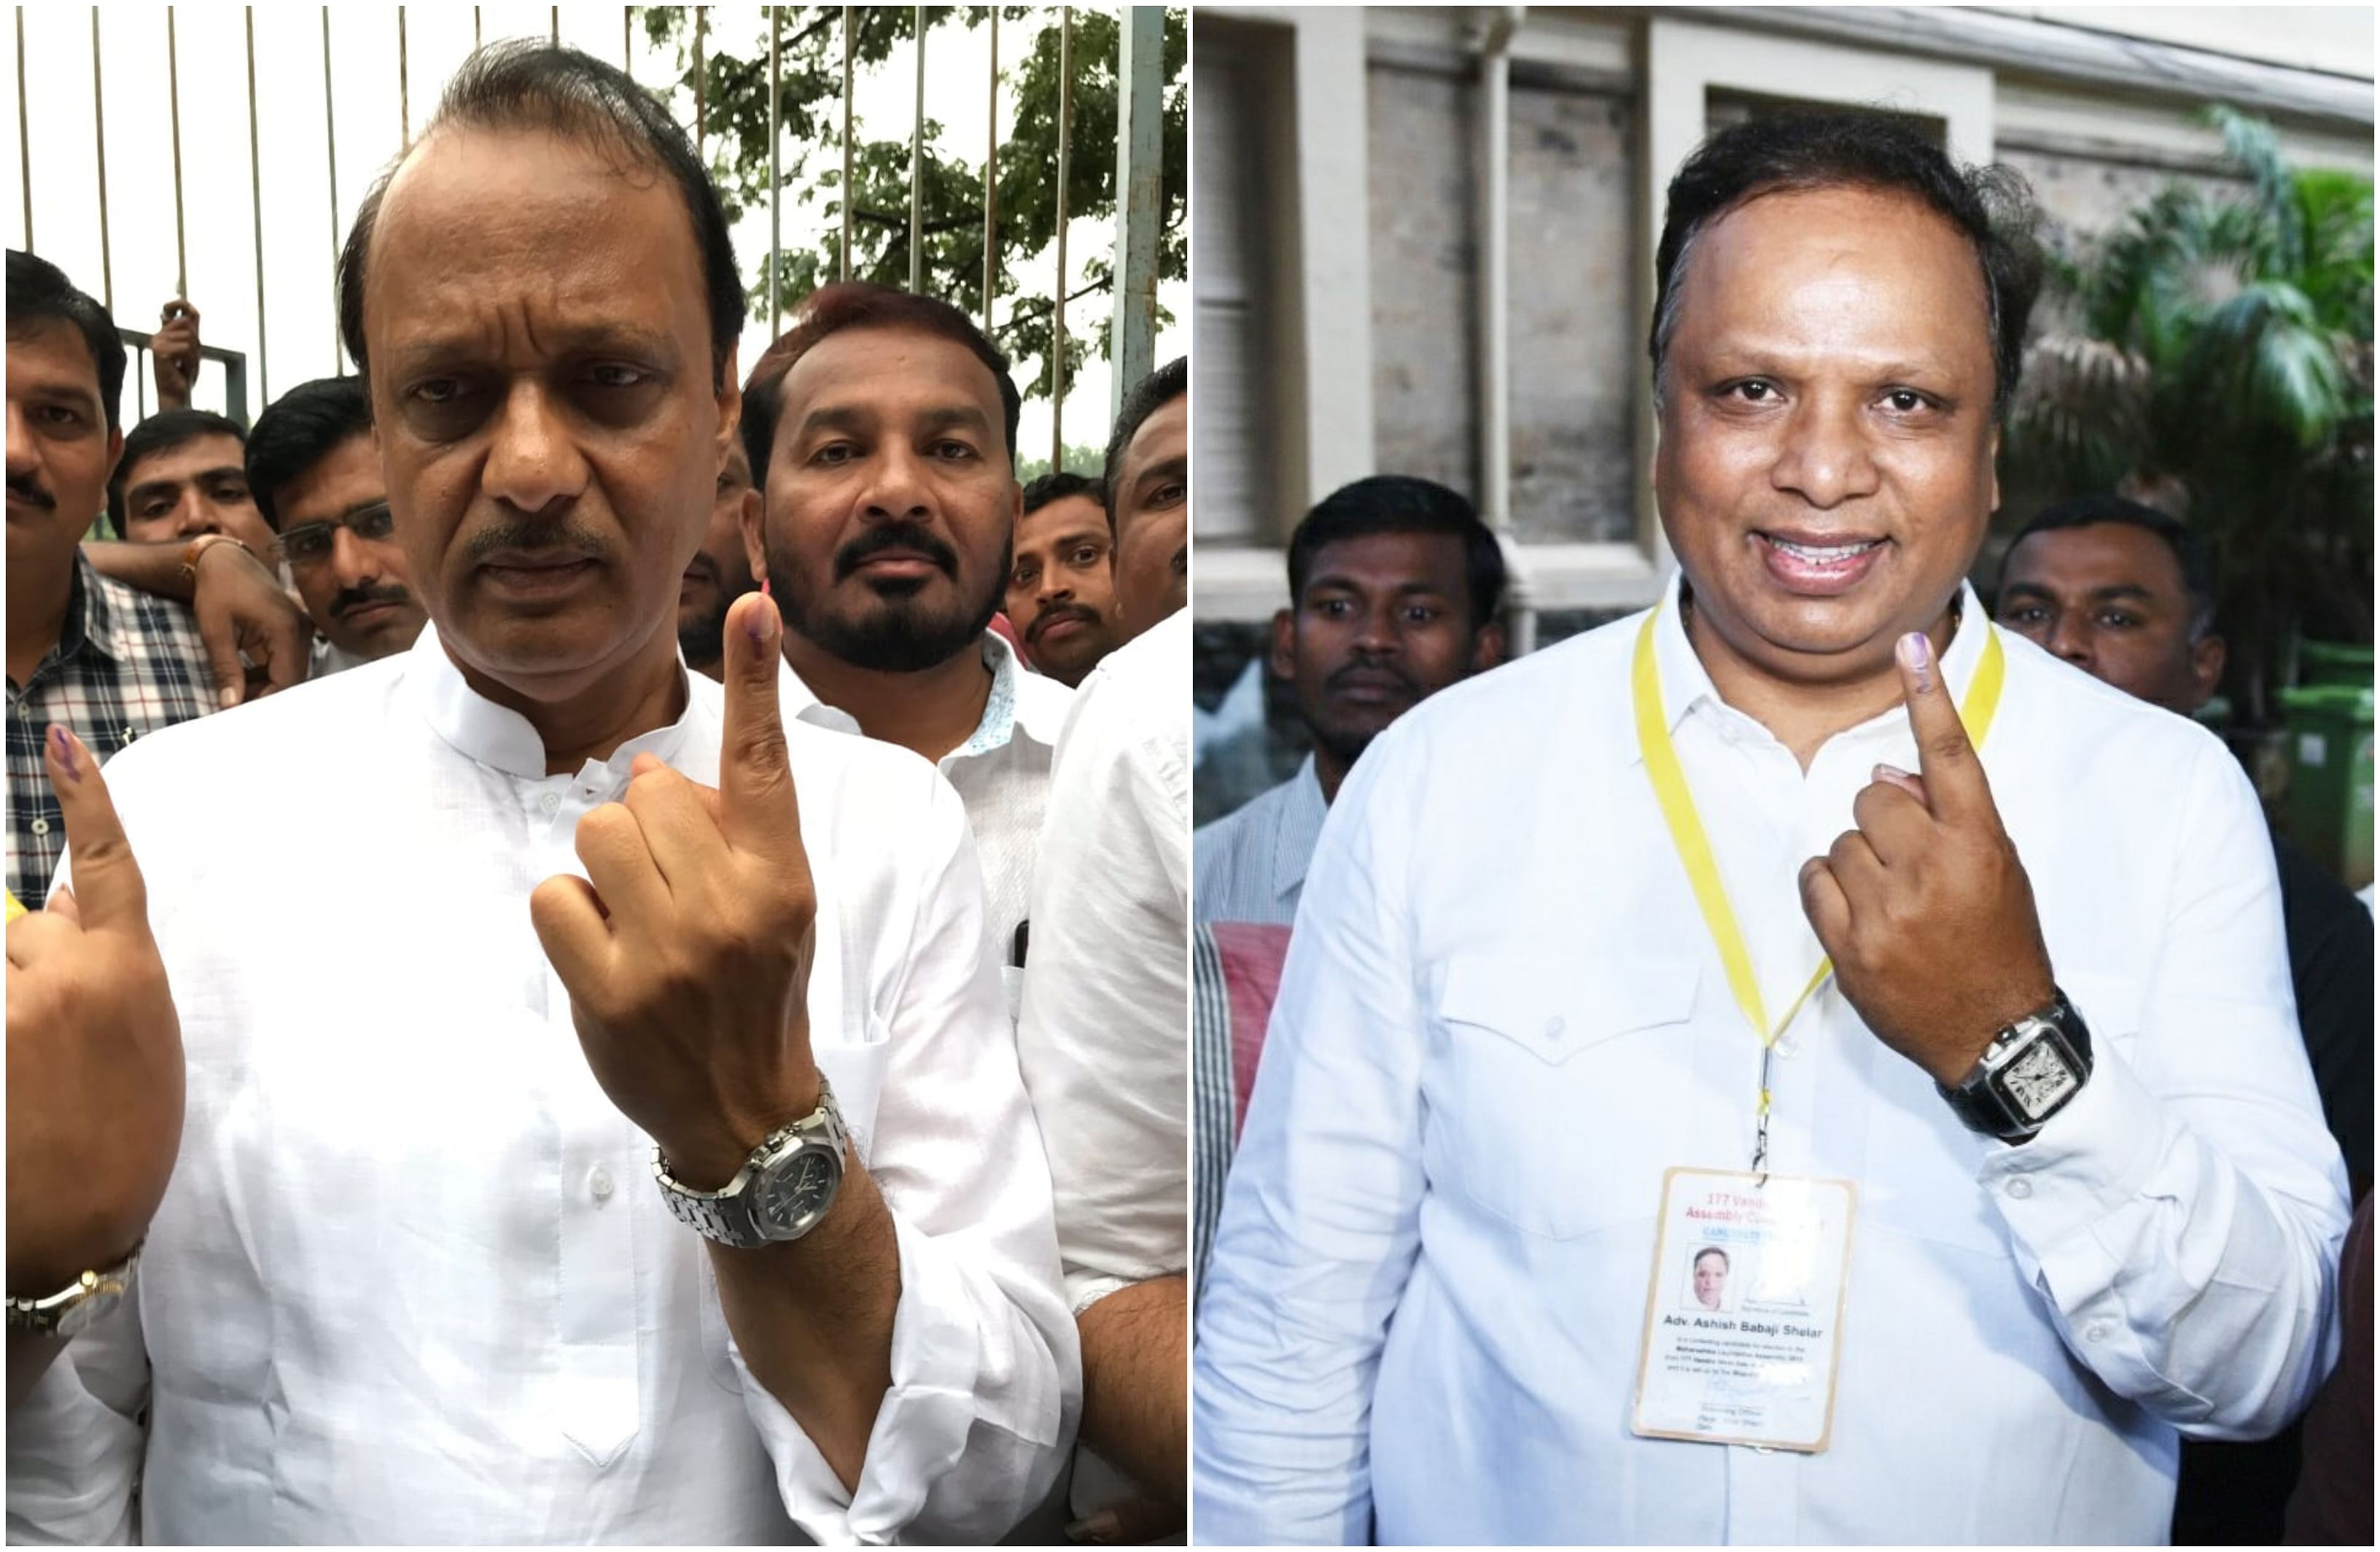 Ajit Pawar is the NCP's nominee from Baramati while Shelar is the BJP's candidate from Bandra-West seat.